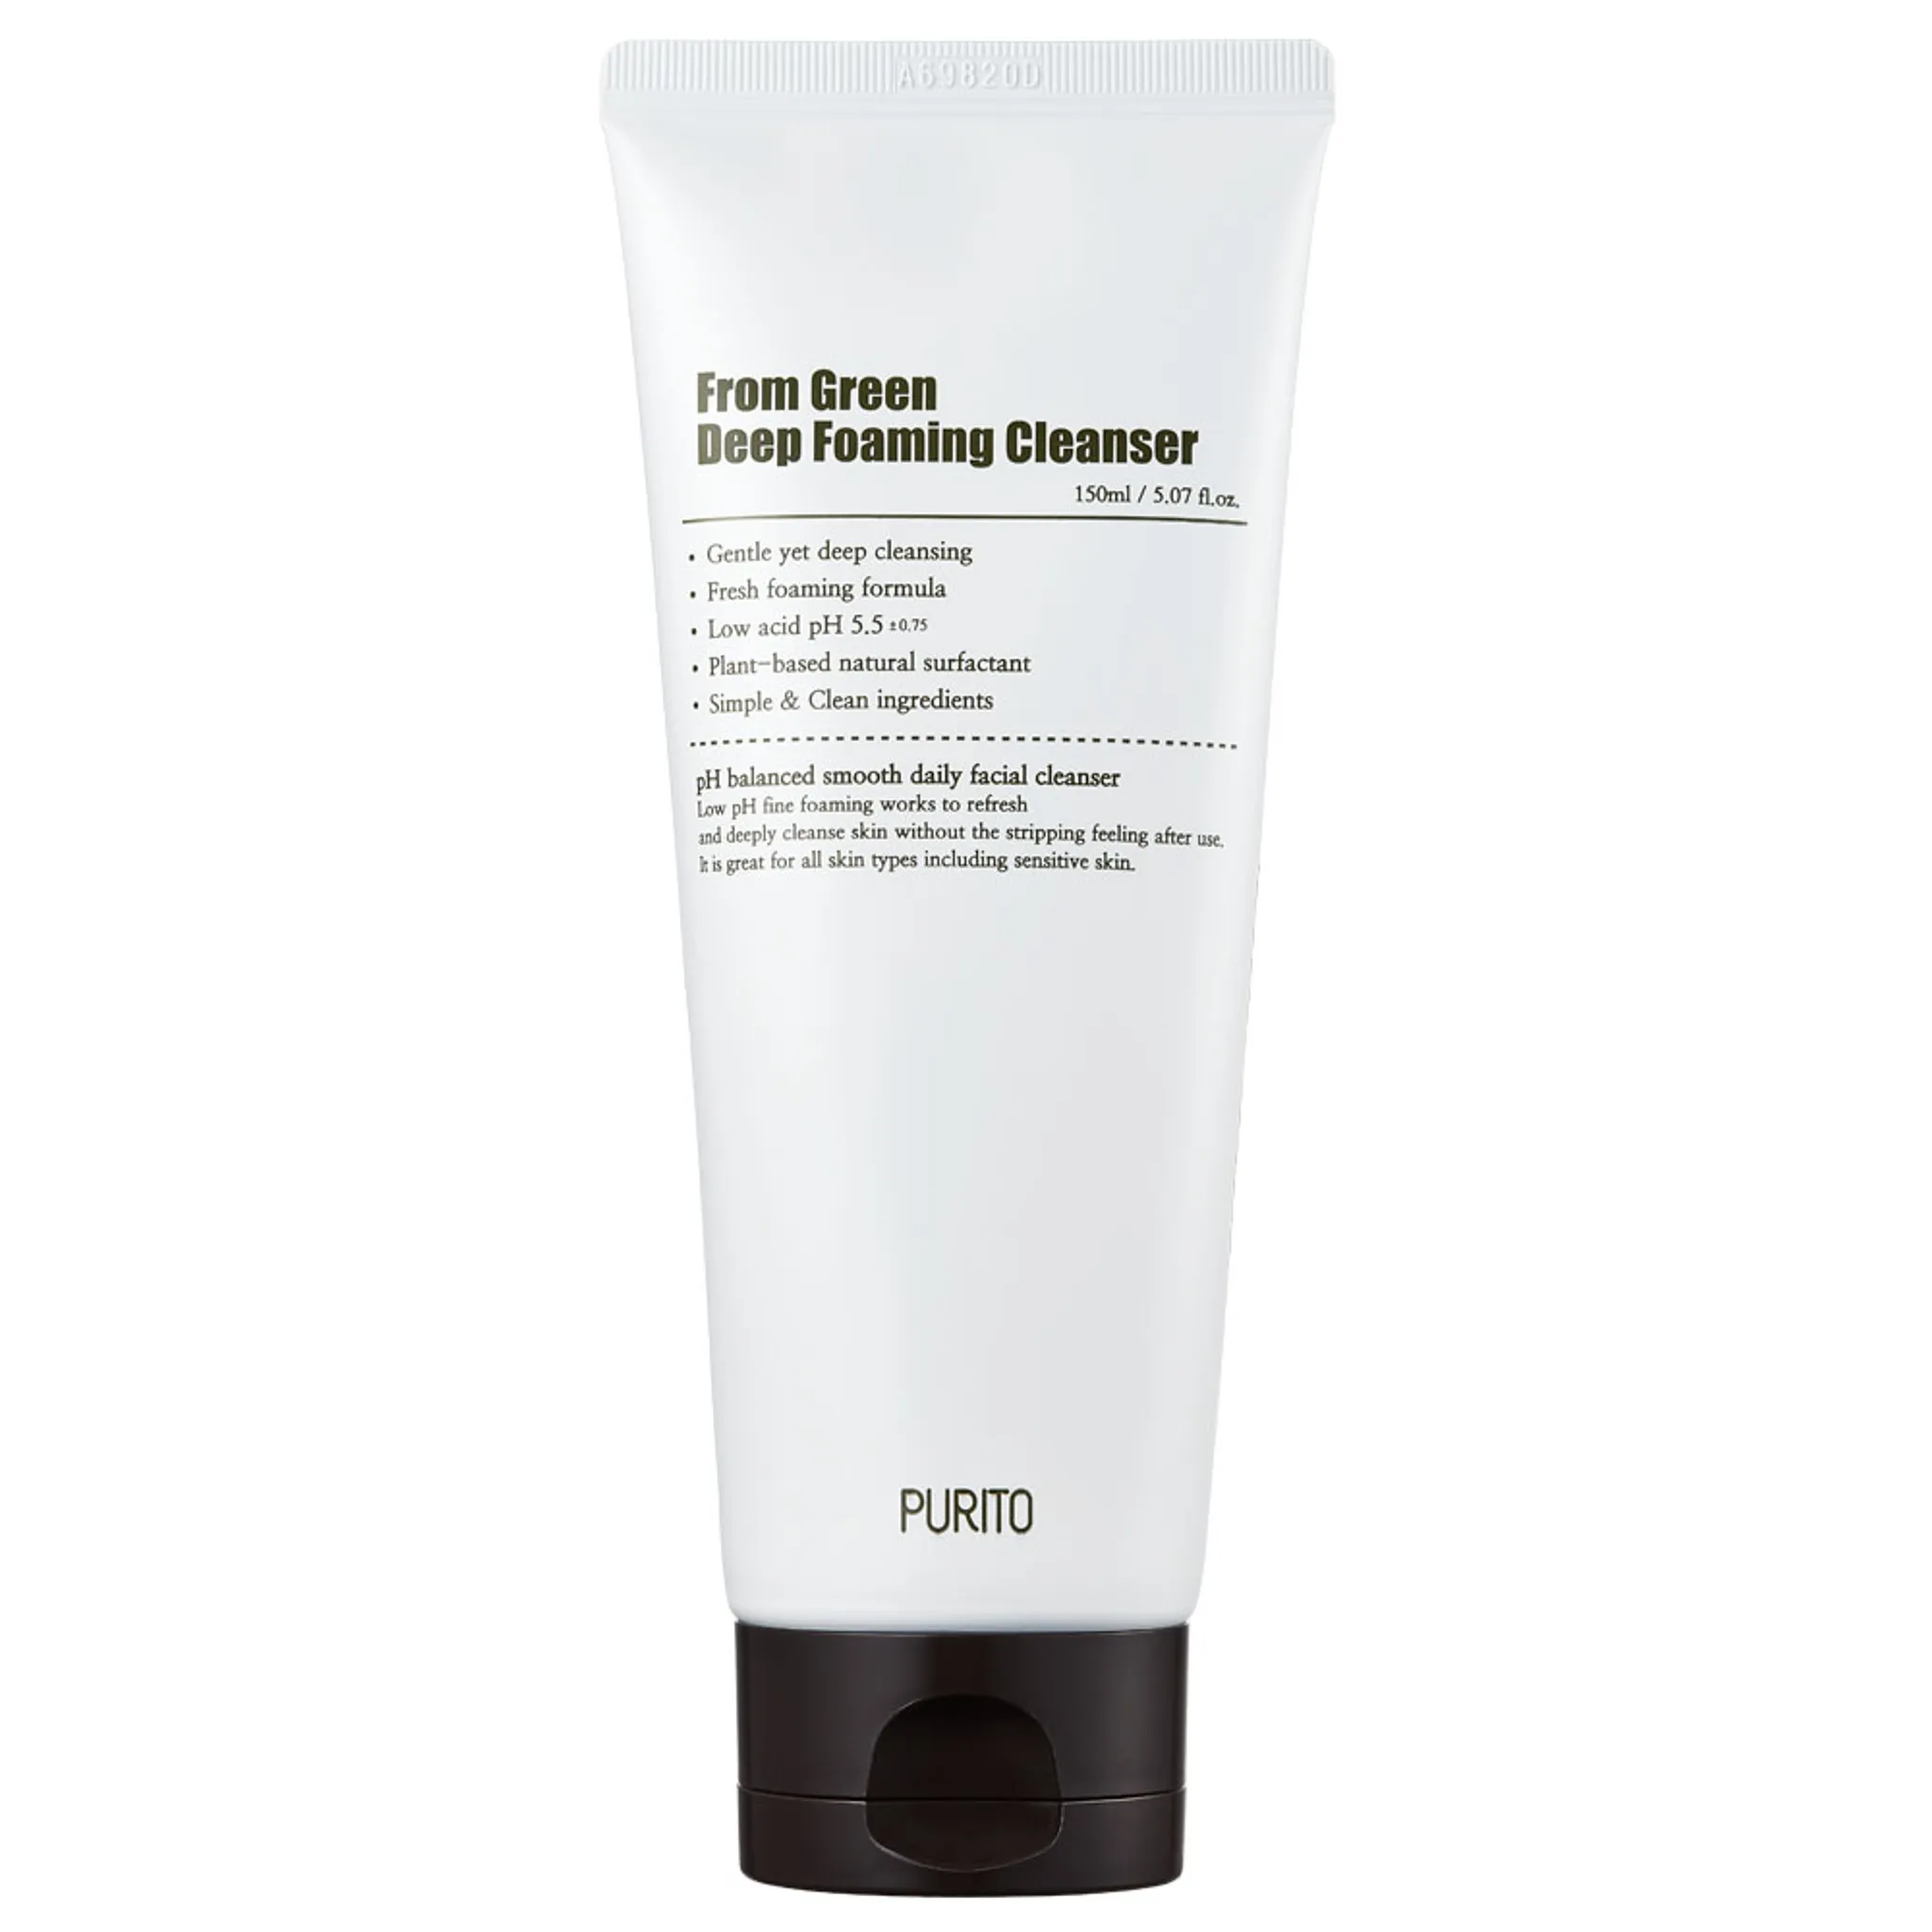 Purito From Green Foaming Cleanser Deep